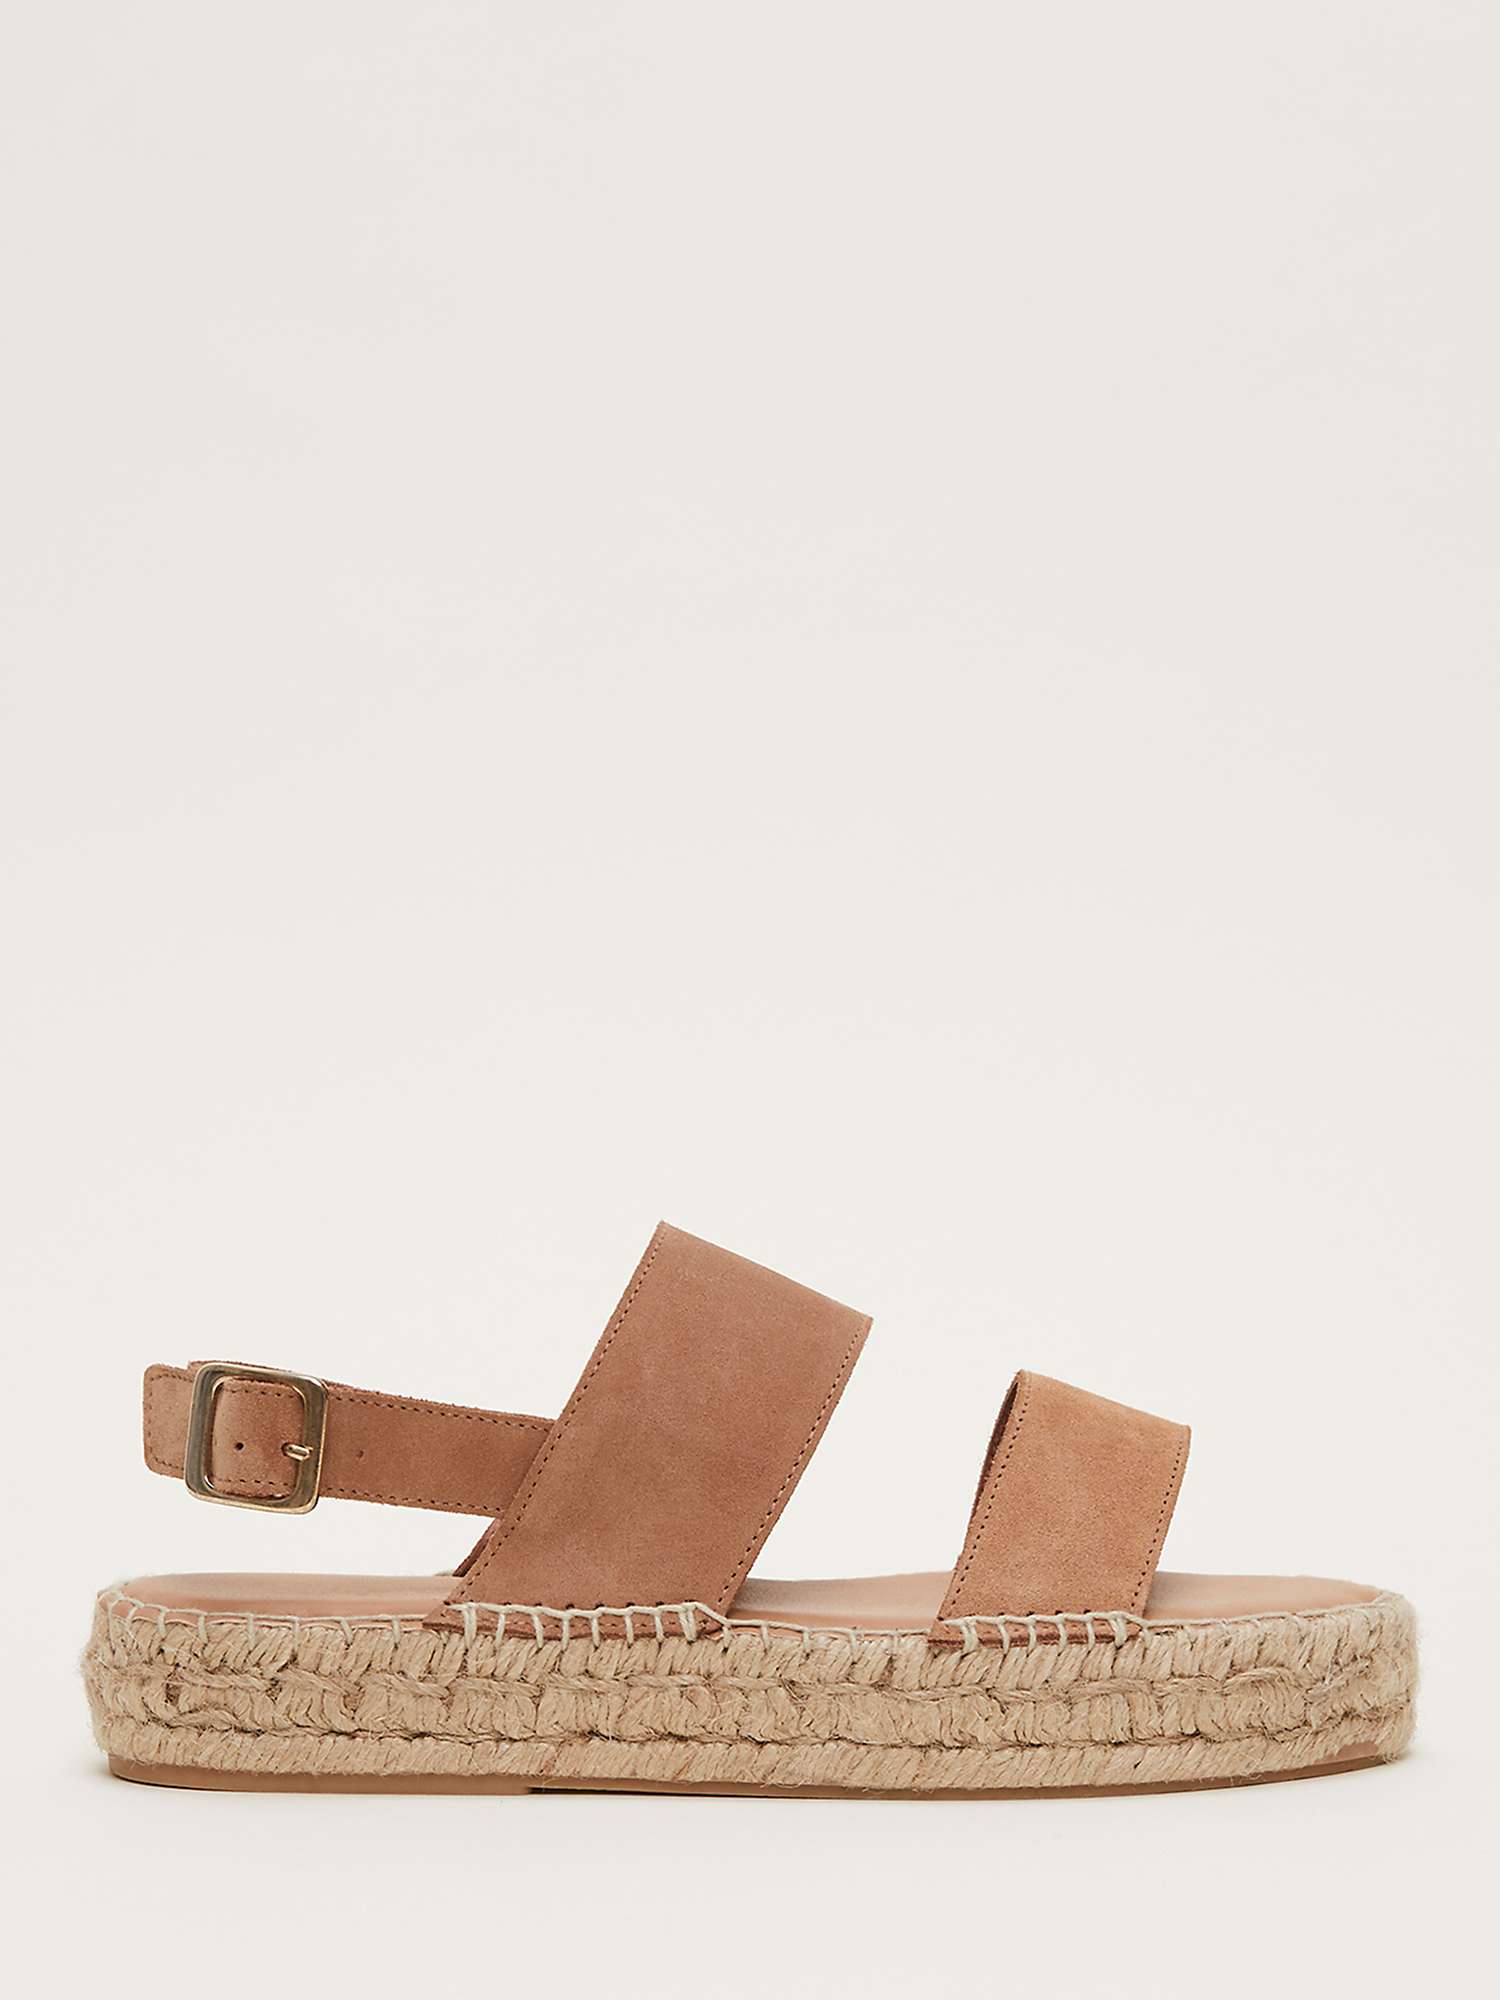 Buy Phase Eight Suede Flat Espadrille Sandals, Tan Online at johnlewis.com